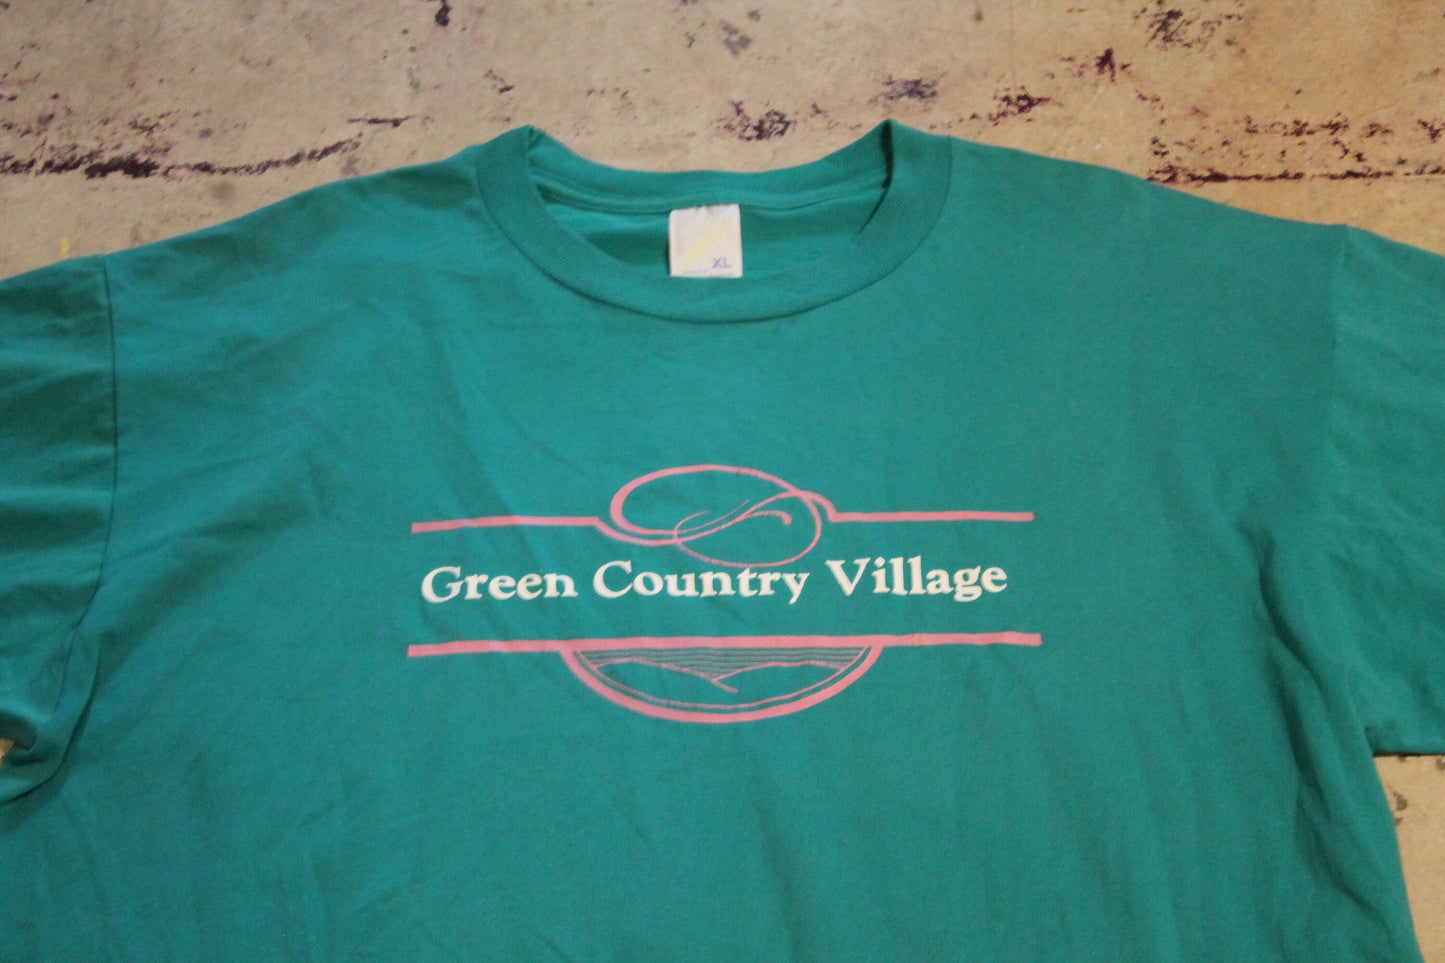 Vintage 1990s Green Country Village Graphic T Shirt / Jerzees / Russell Athletics / Made In USA / 90s